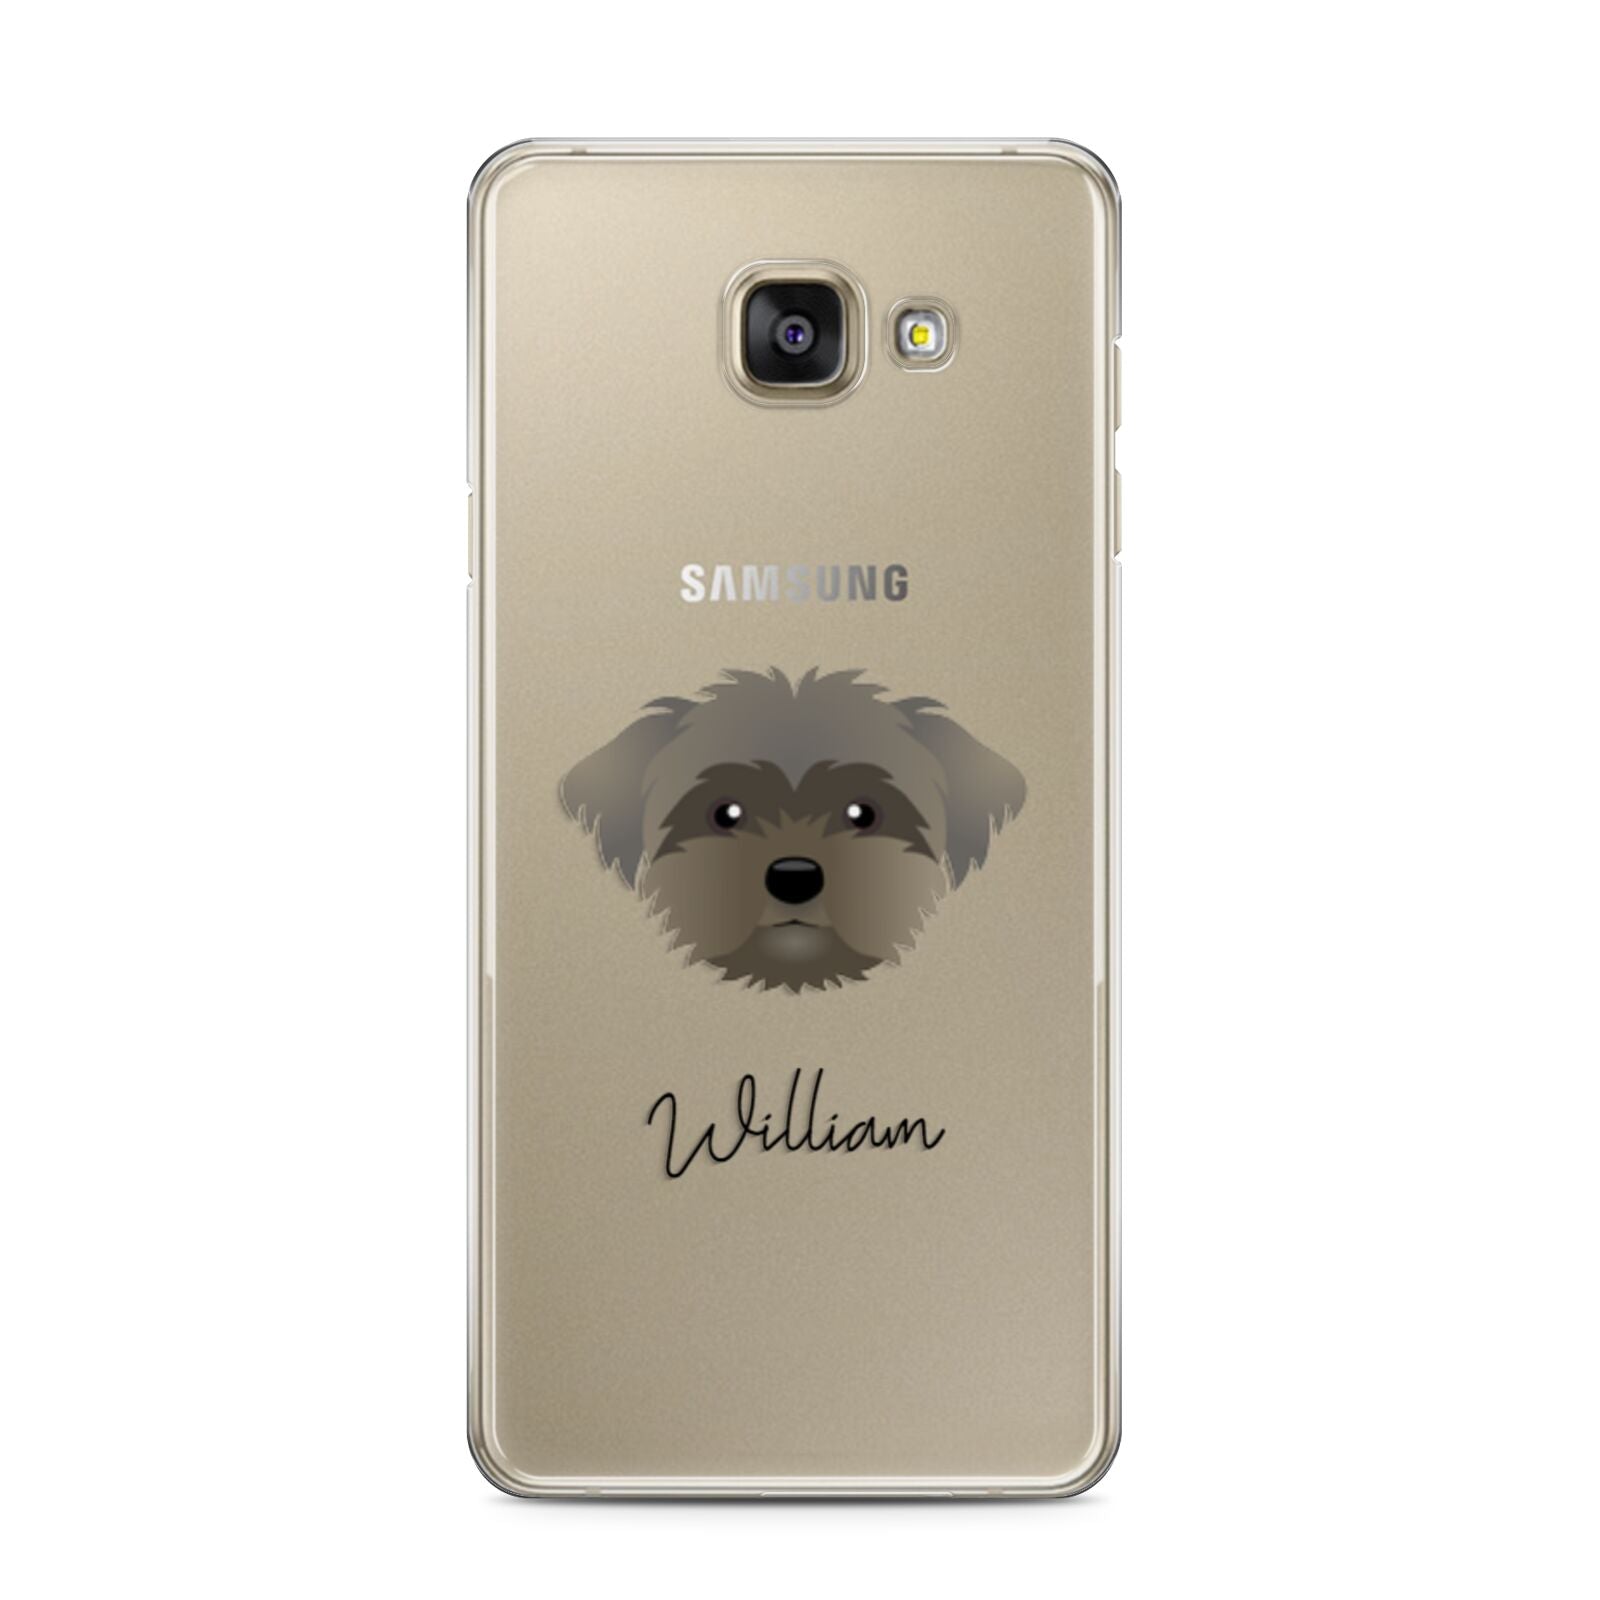 Peek a poo Personalised Samsung Galaxy A3 2016 Case on gold phone